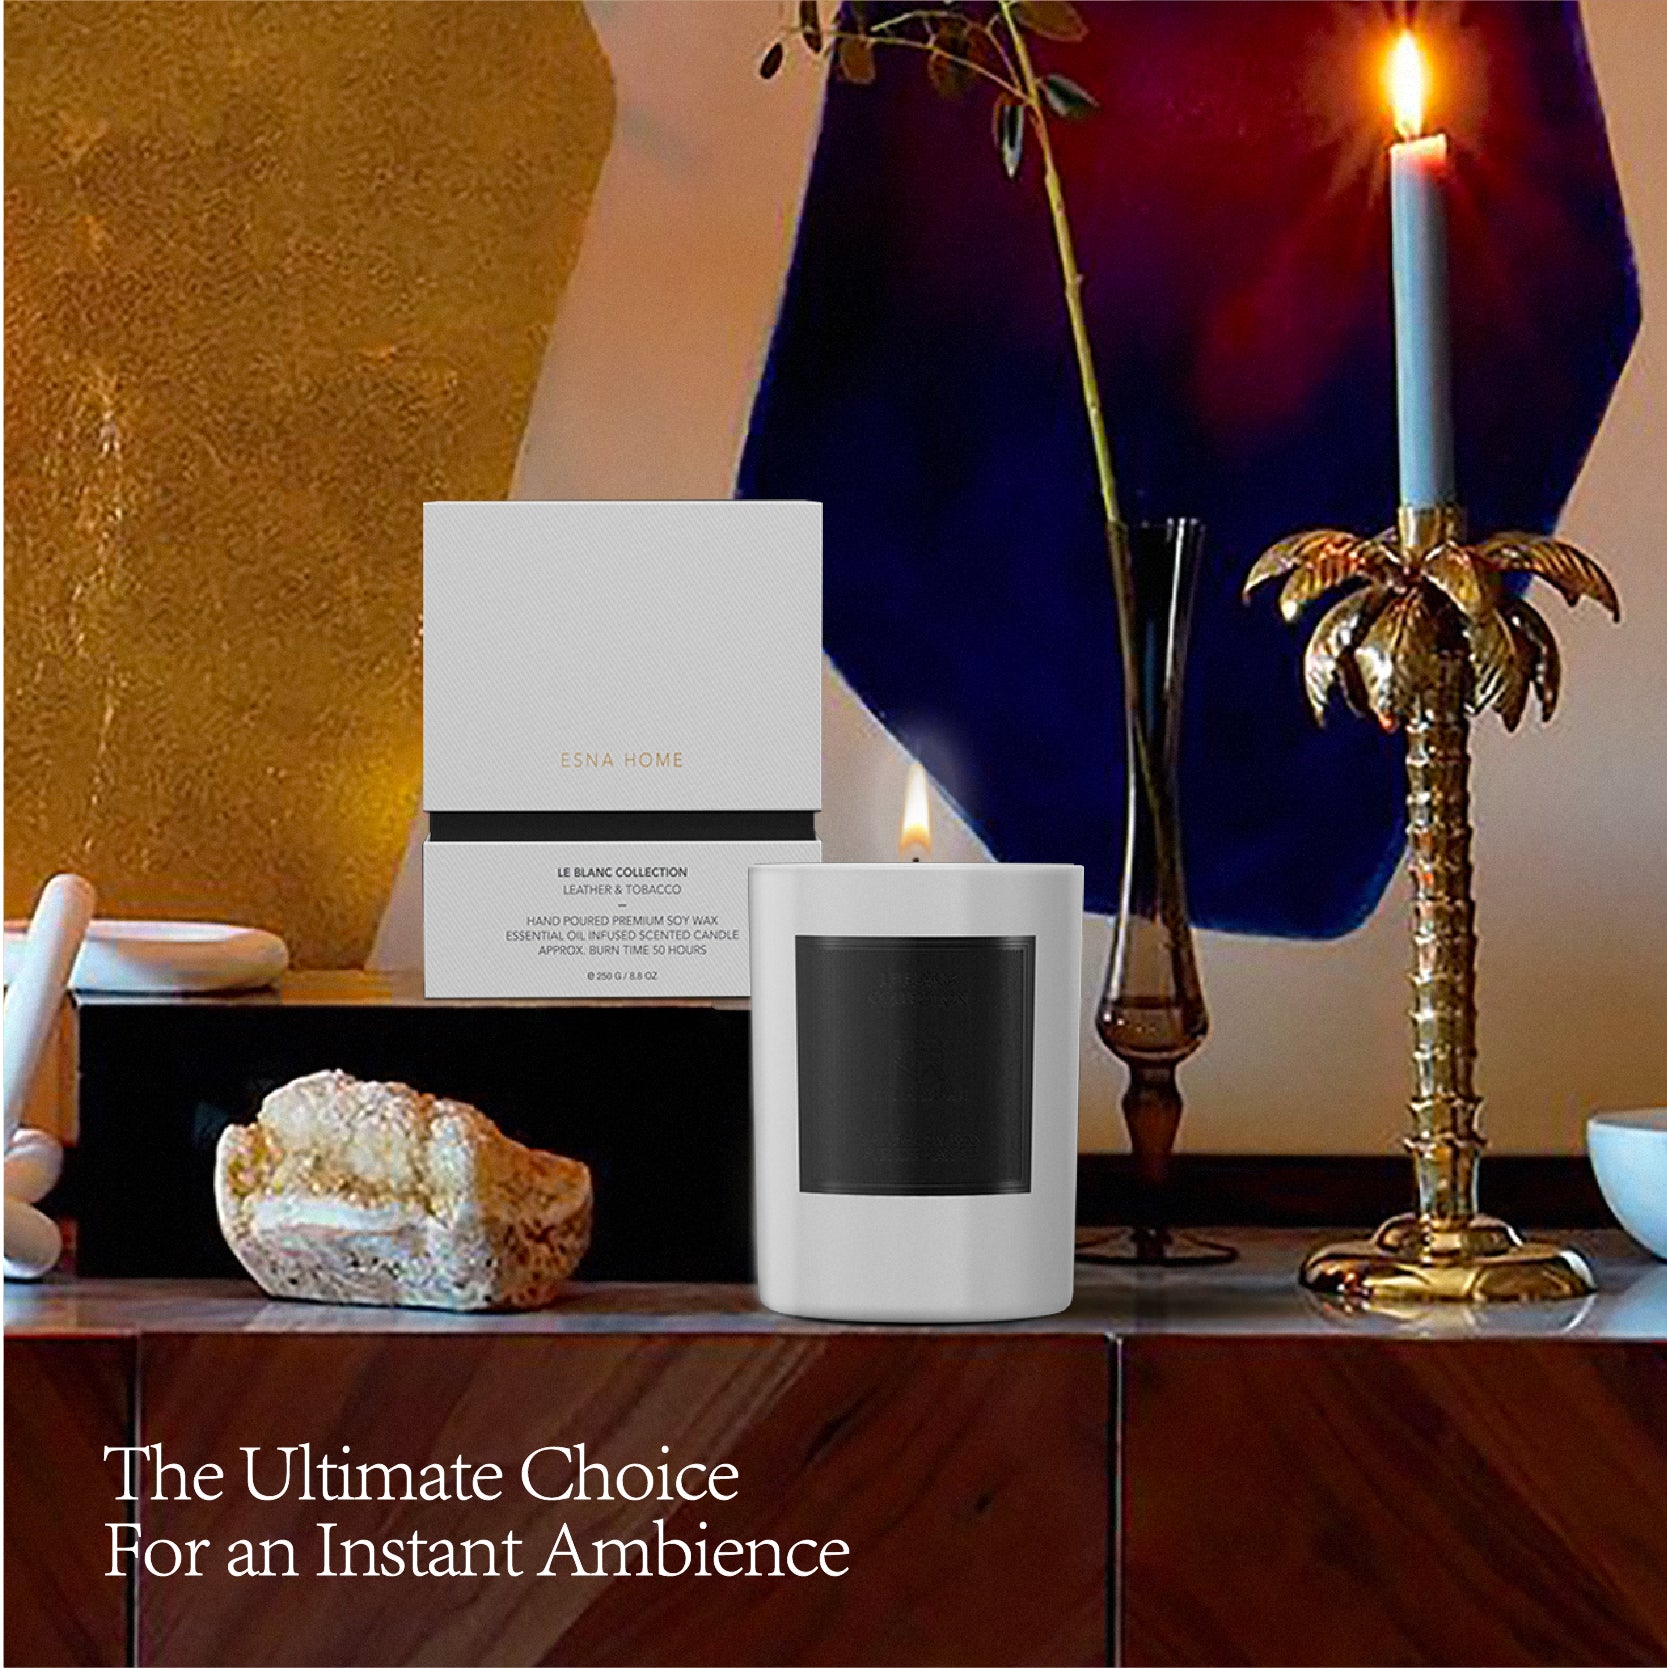 Aromatic Leather & Tobacco Leaf Scented Candle  |  Le Blanc Collection